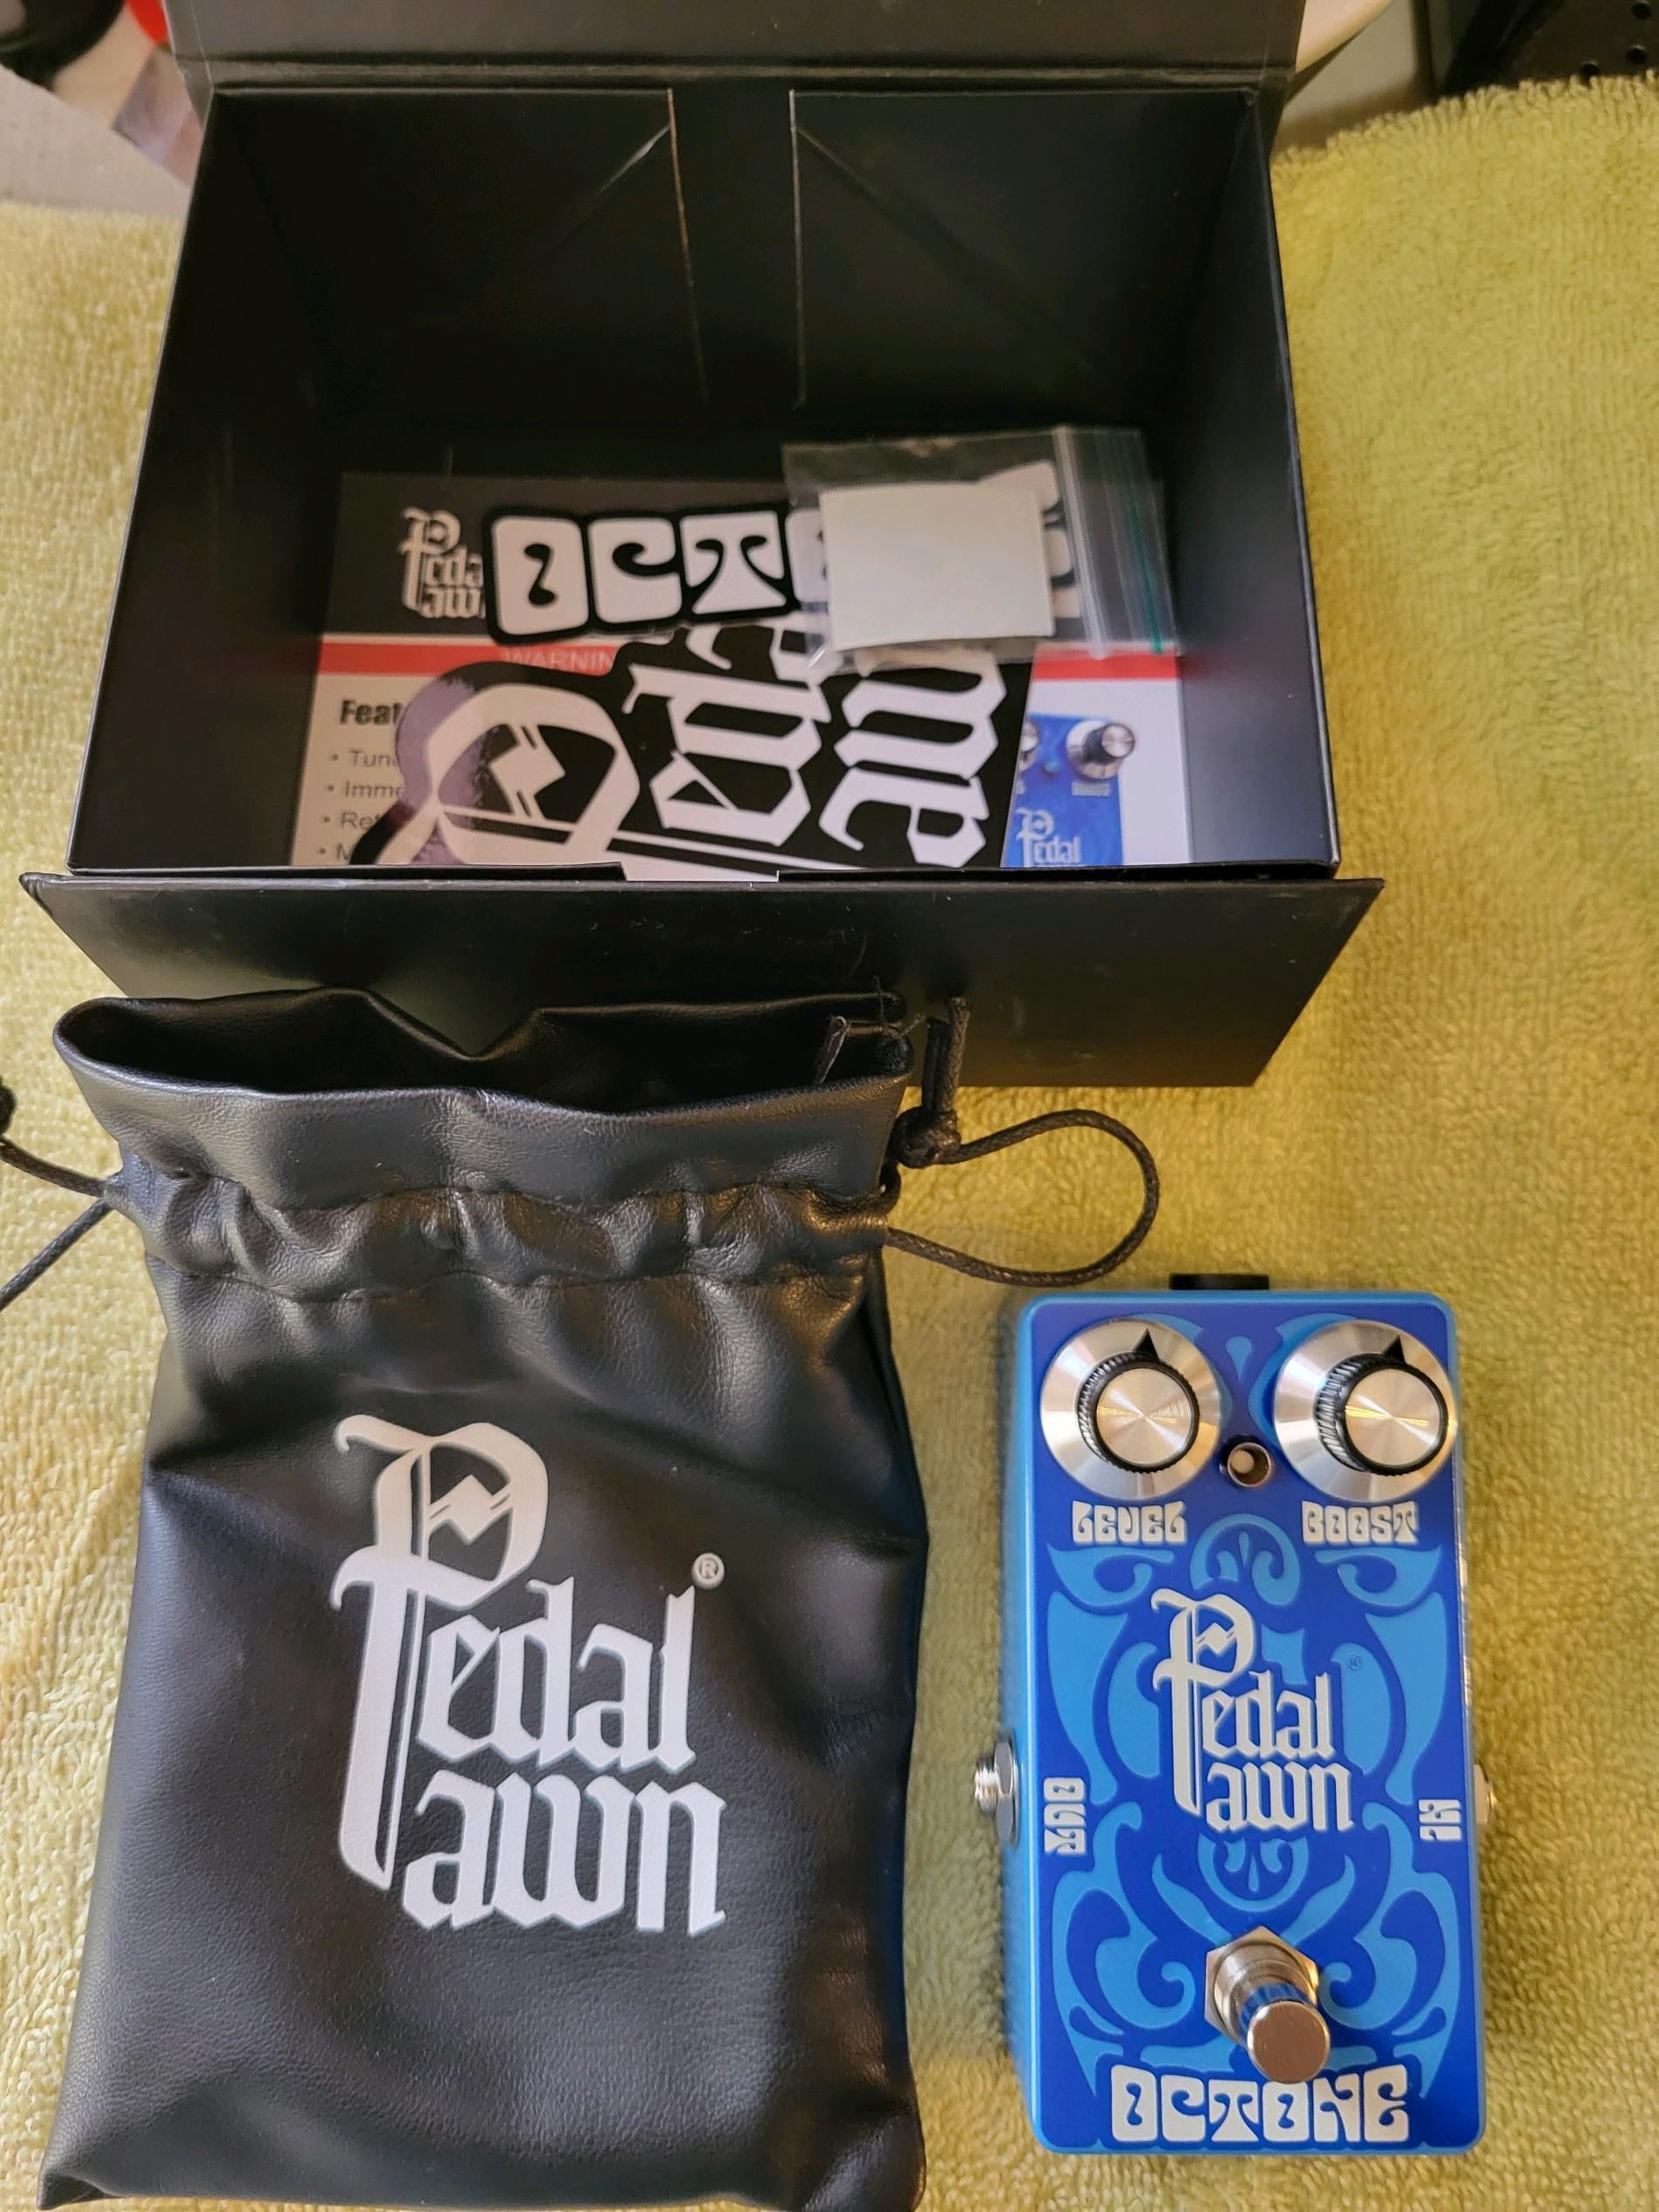 Used Pedal Pawn Octone Fuzz Pedal-Octavia - Sweetwater's Gear Exchange